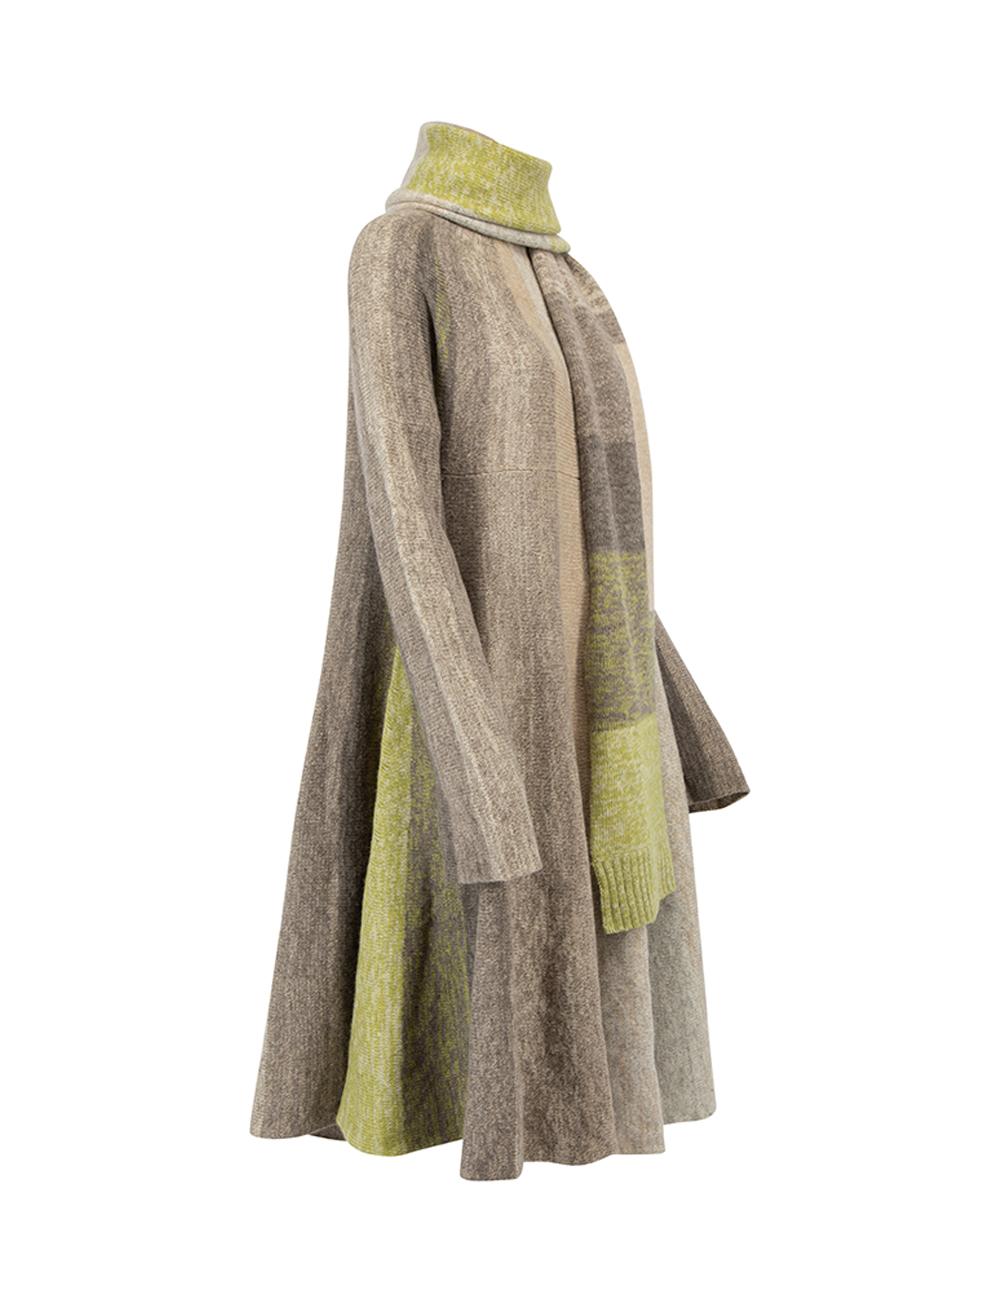 CONDITION is Very good. Minimal wear to dress/scarf is evident. Minimal pilling seen on this used Max Azria designer resale item. Details Multicolour- Beige and green tone Wool Scarf and dress matching set Knitted Colourblock pattern Oversized